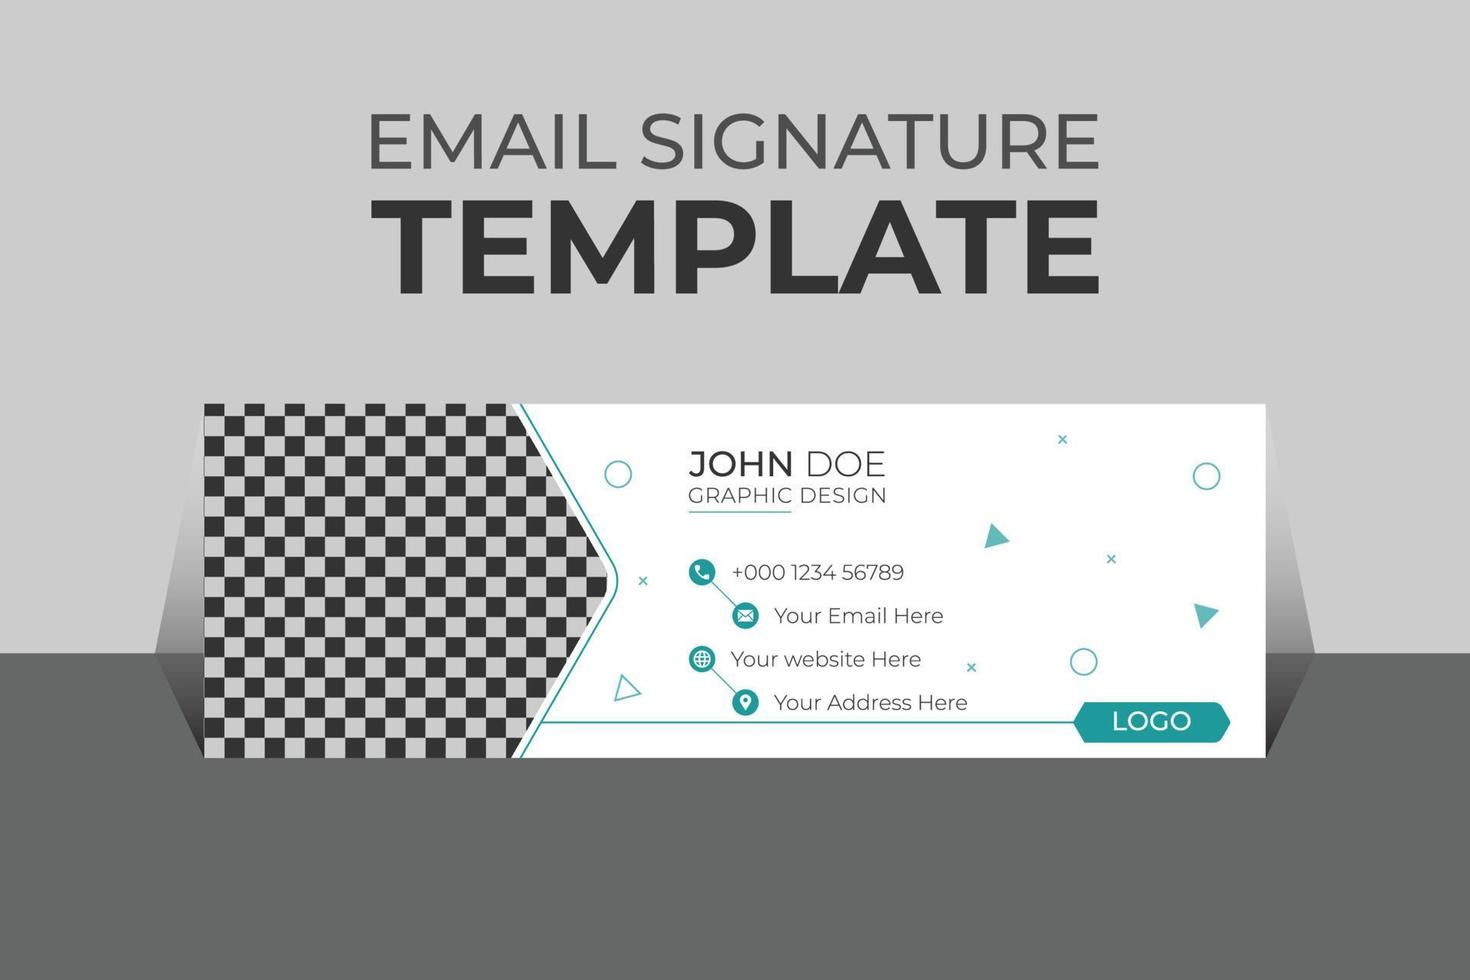 Professional organic business and corporate email signature Template Vector Design and Modern and Minimal Layout.